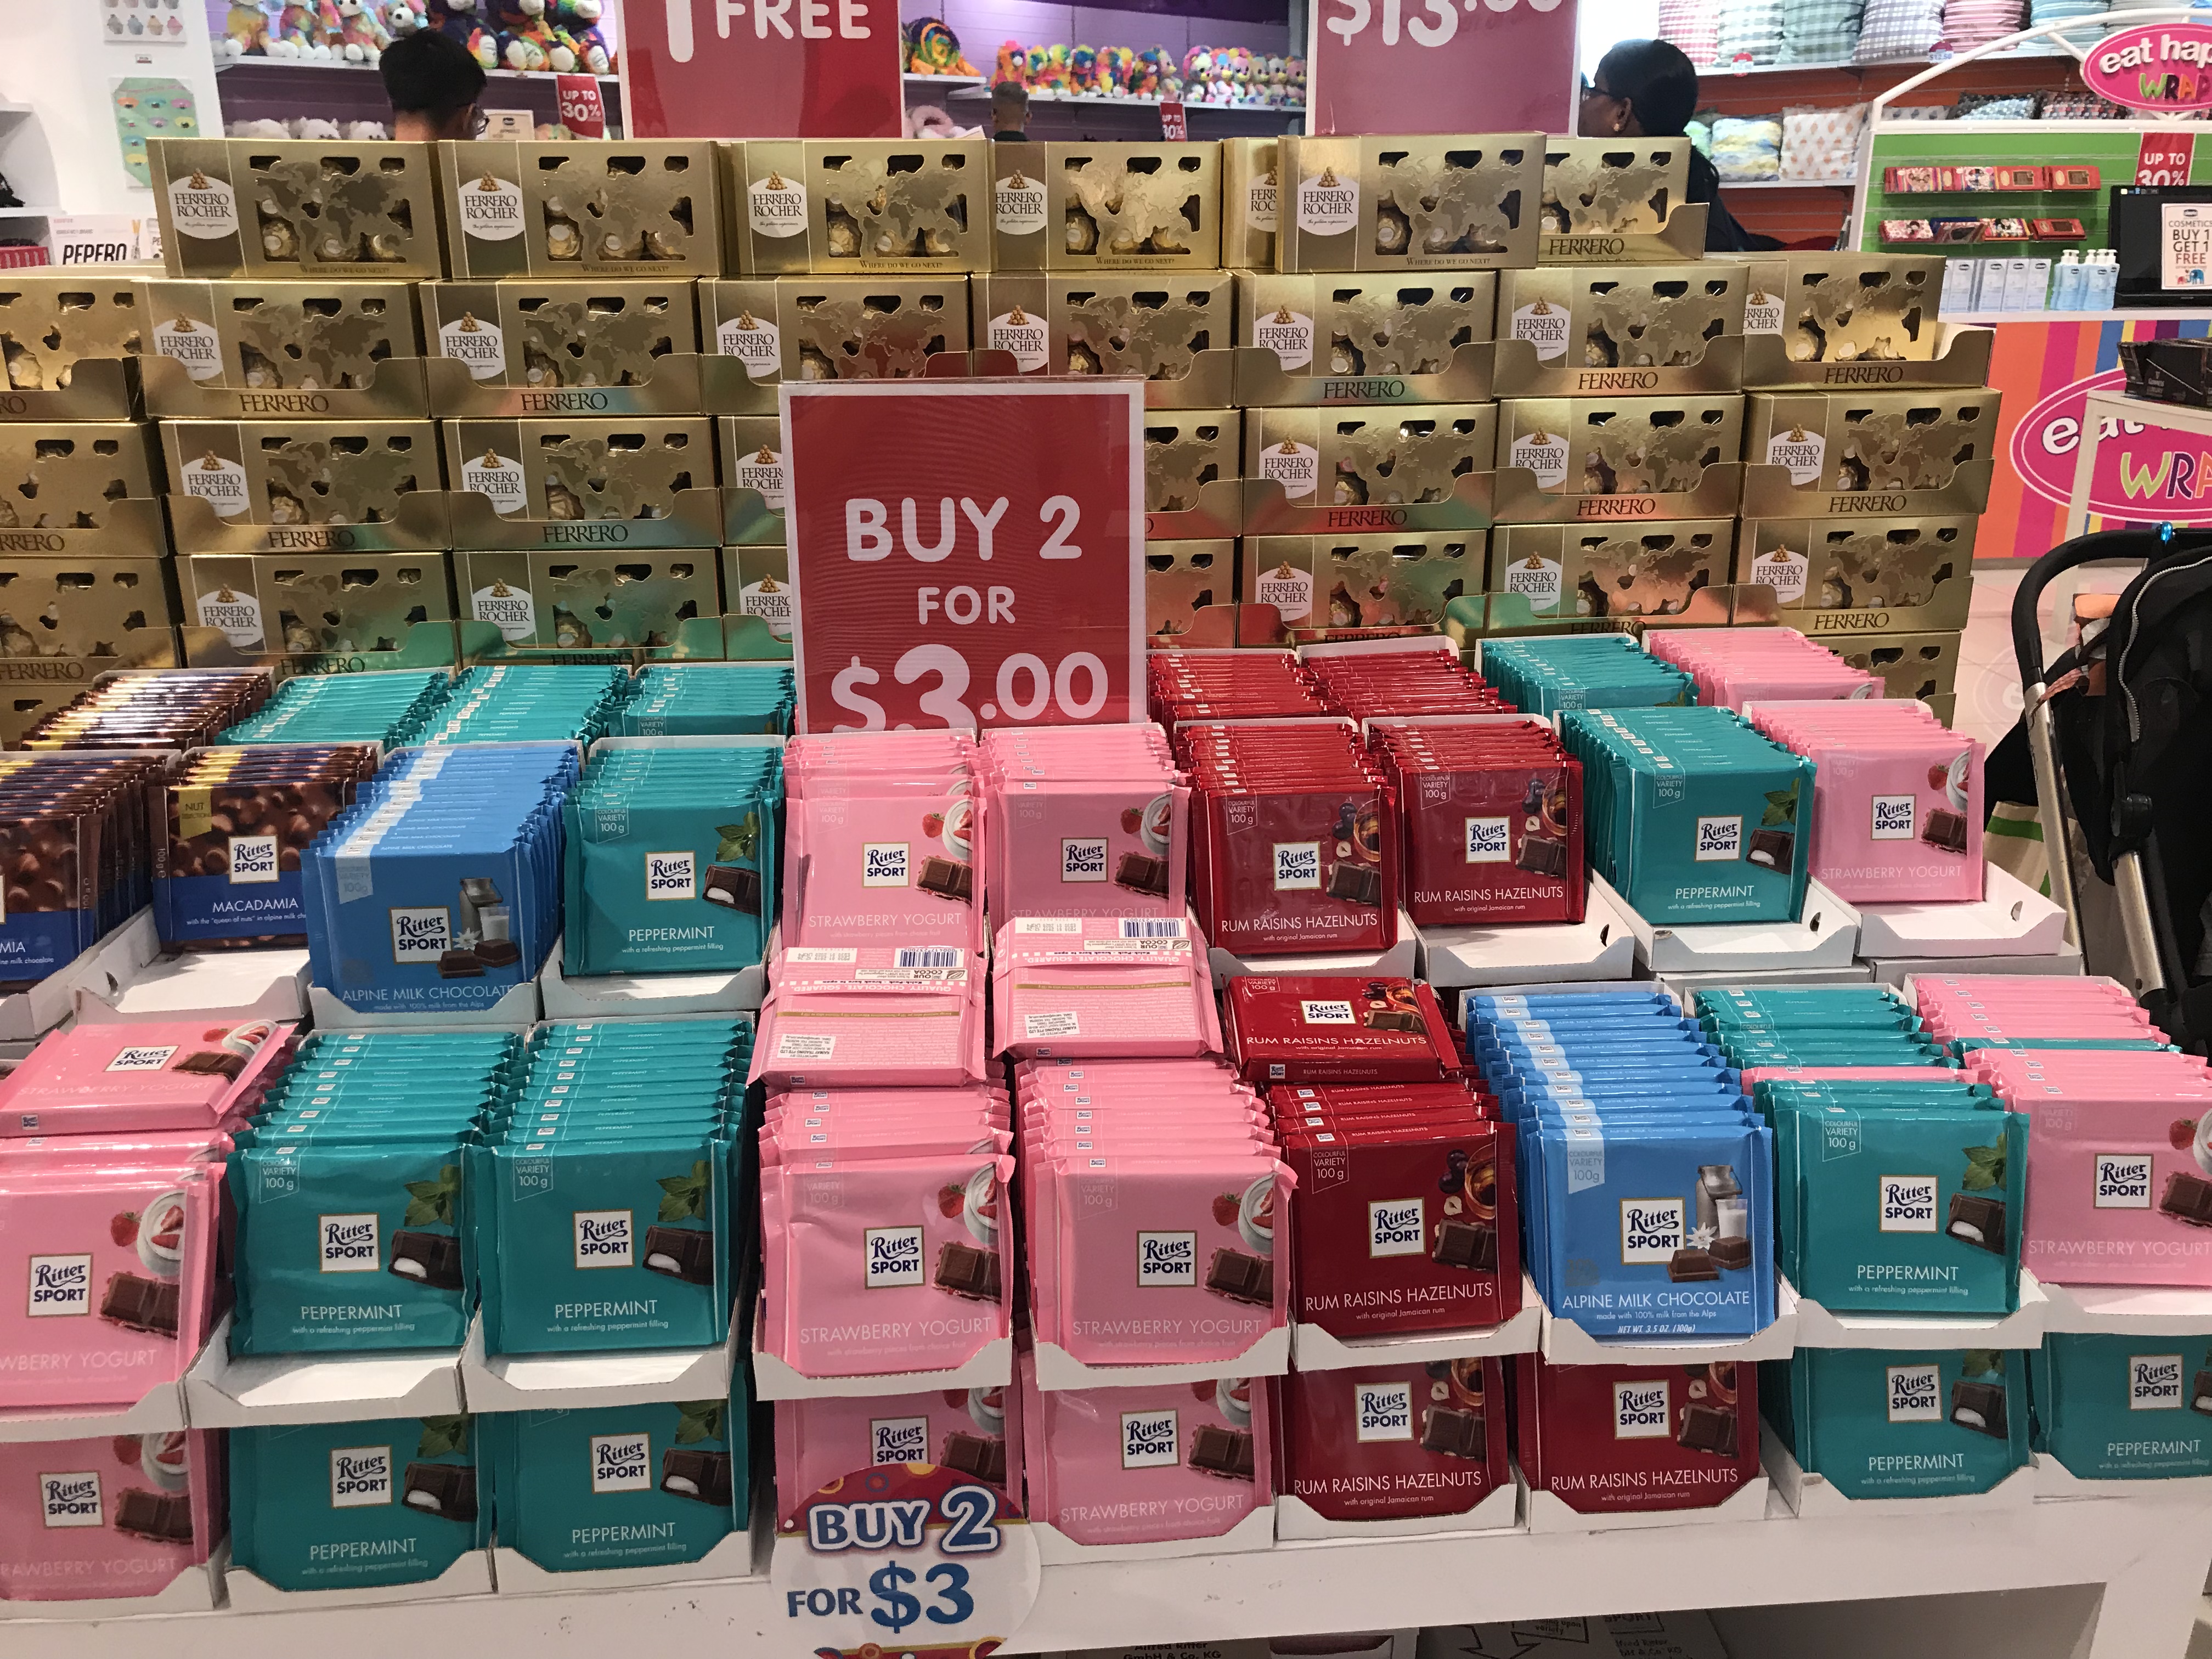 Candylicious to close at VivoCity, offers up to 50% off chocolates, candies and snacks! - 2